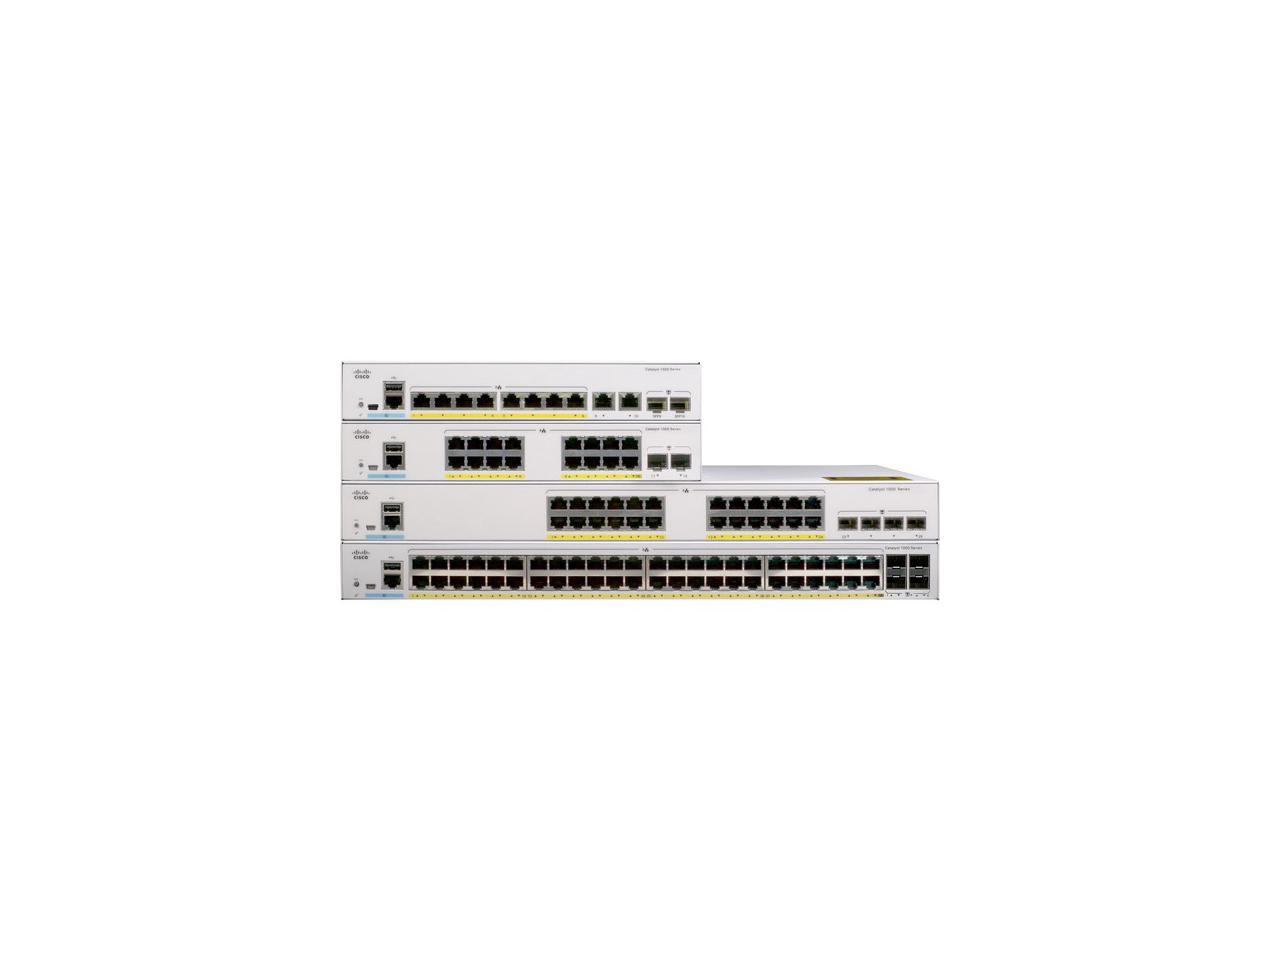 Cisco - C1000-8FP-E-2G-L - Cisco Catalyst C1000-8FP Ethernet Switch - 8 Ports - Manageable - 2 Layer Supported - Modular